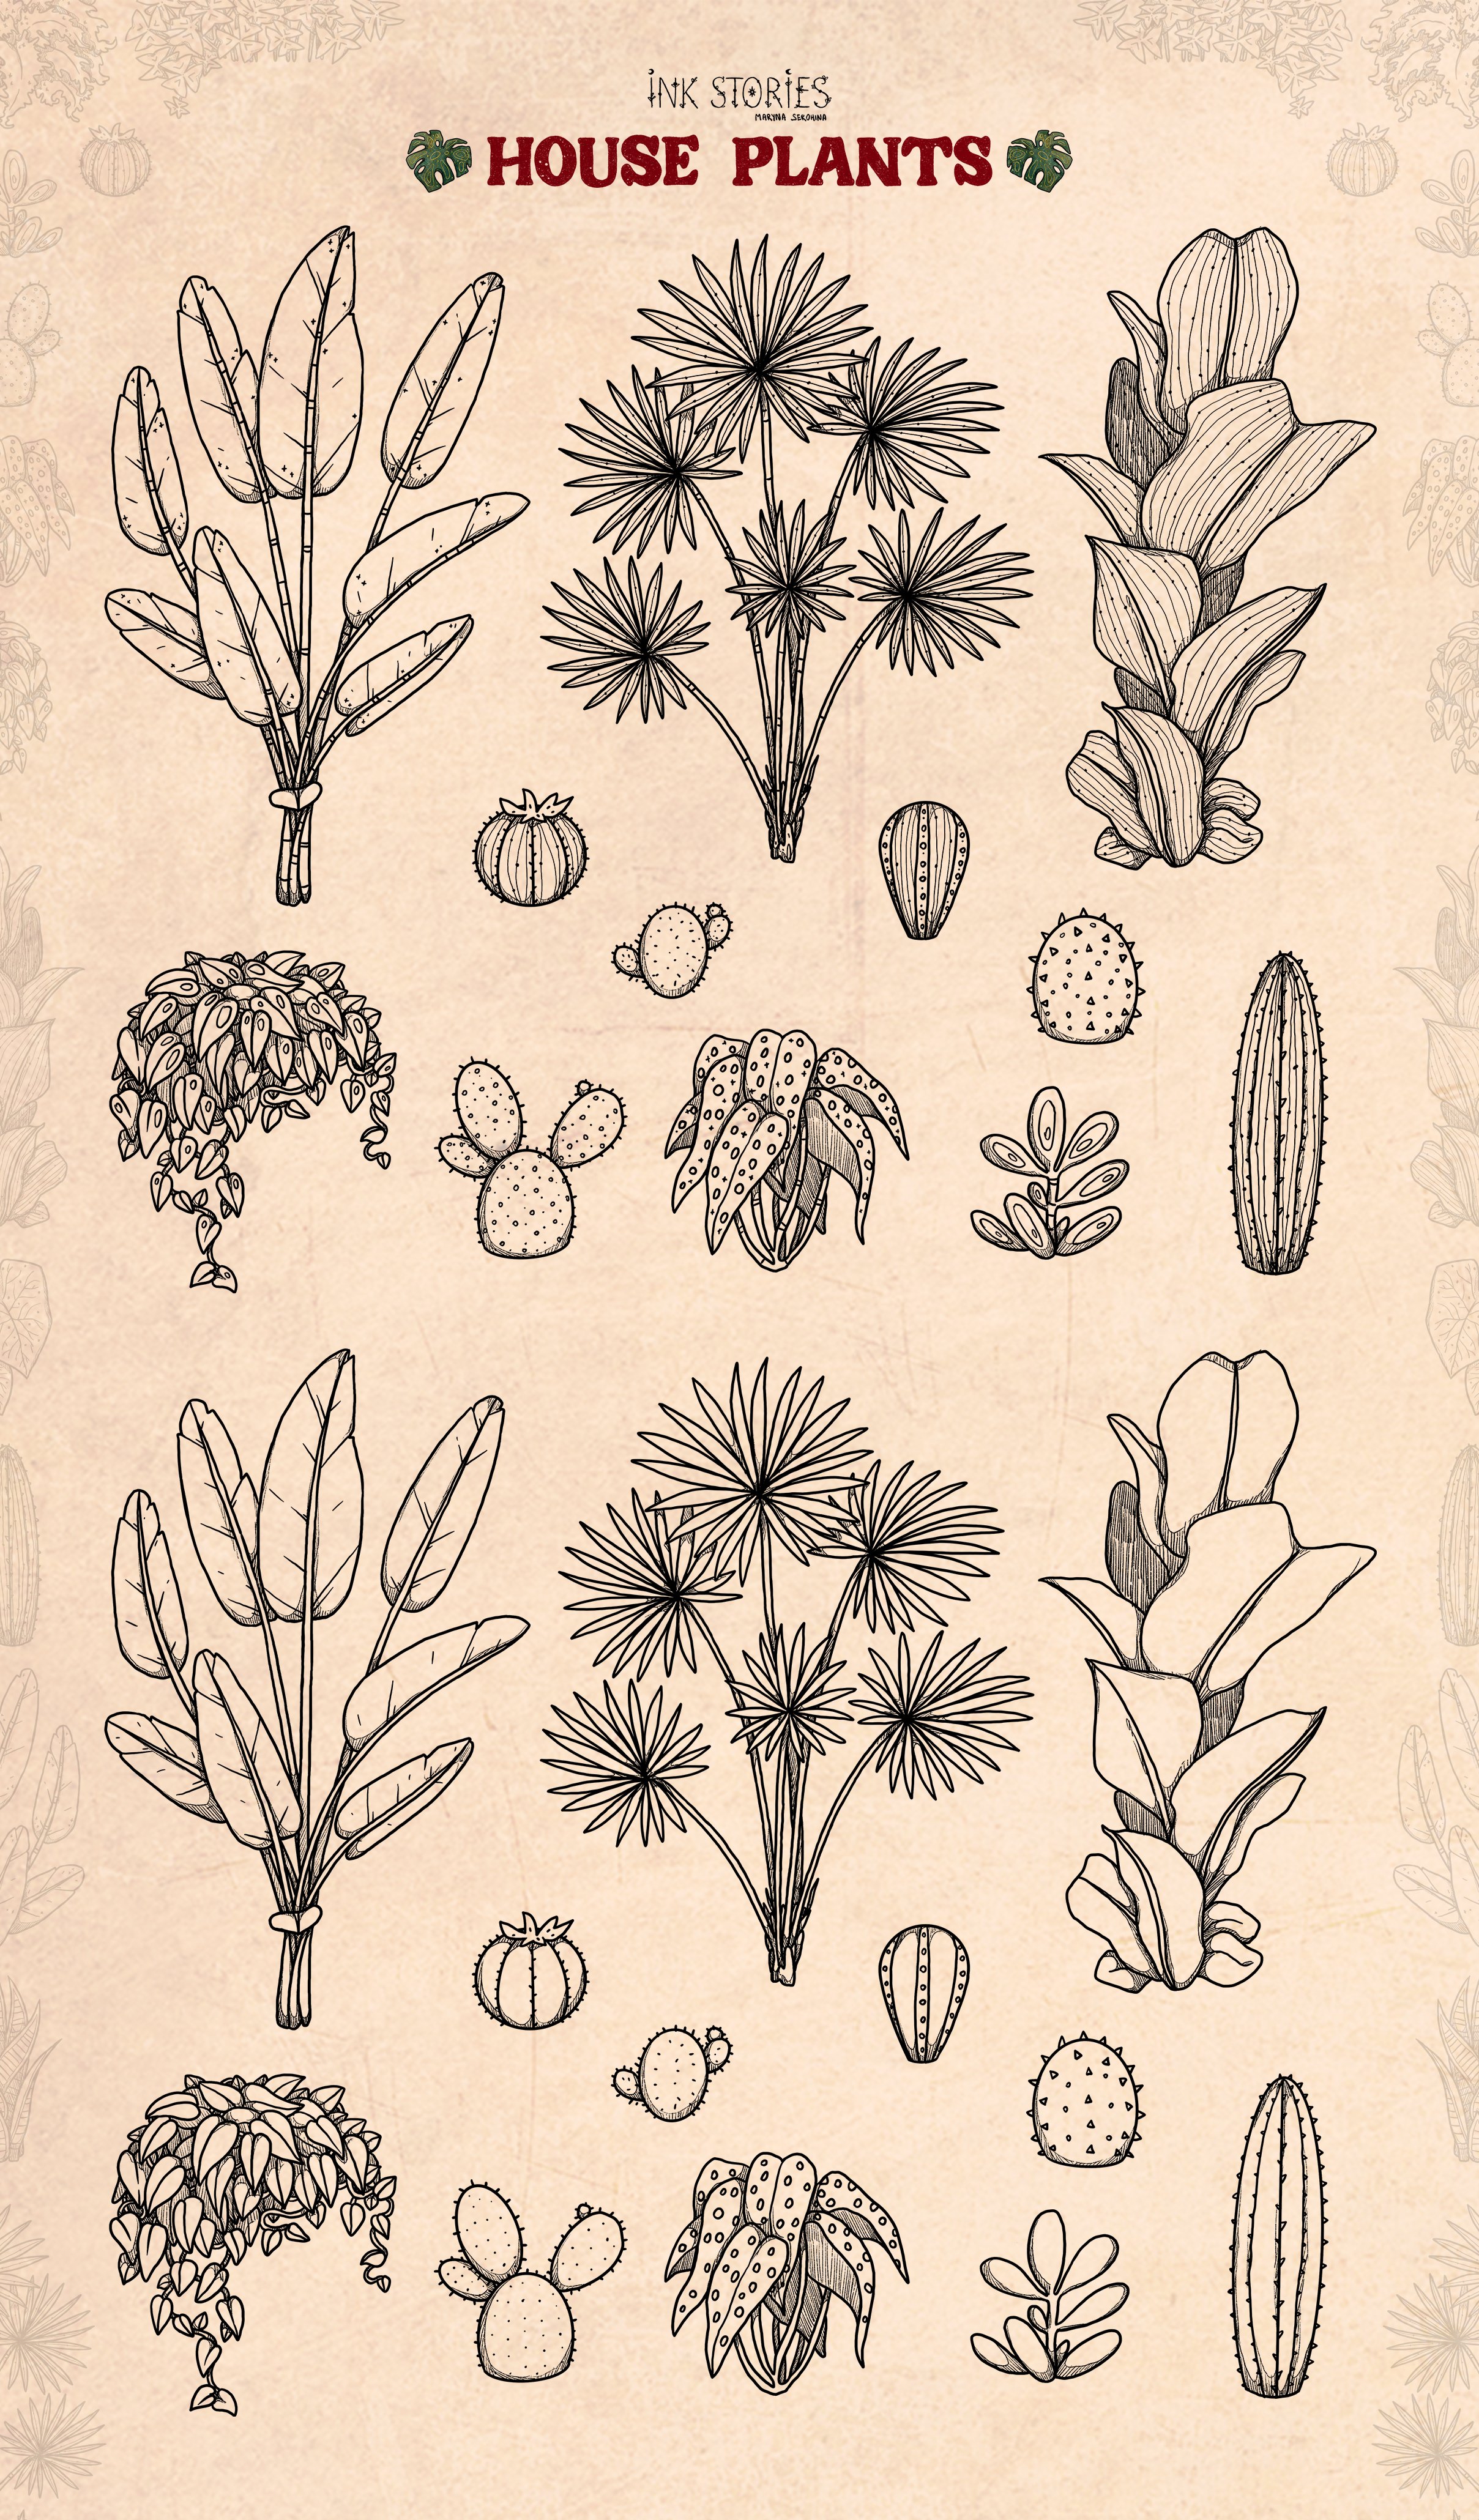 Bunch of plants that are drawn on a piece of paper.